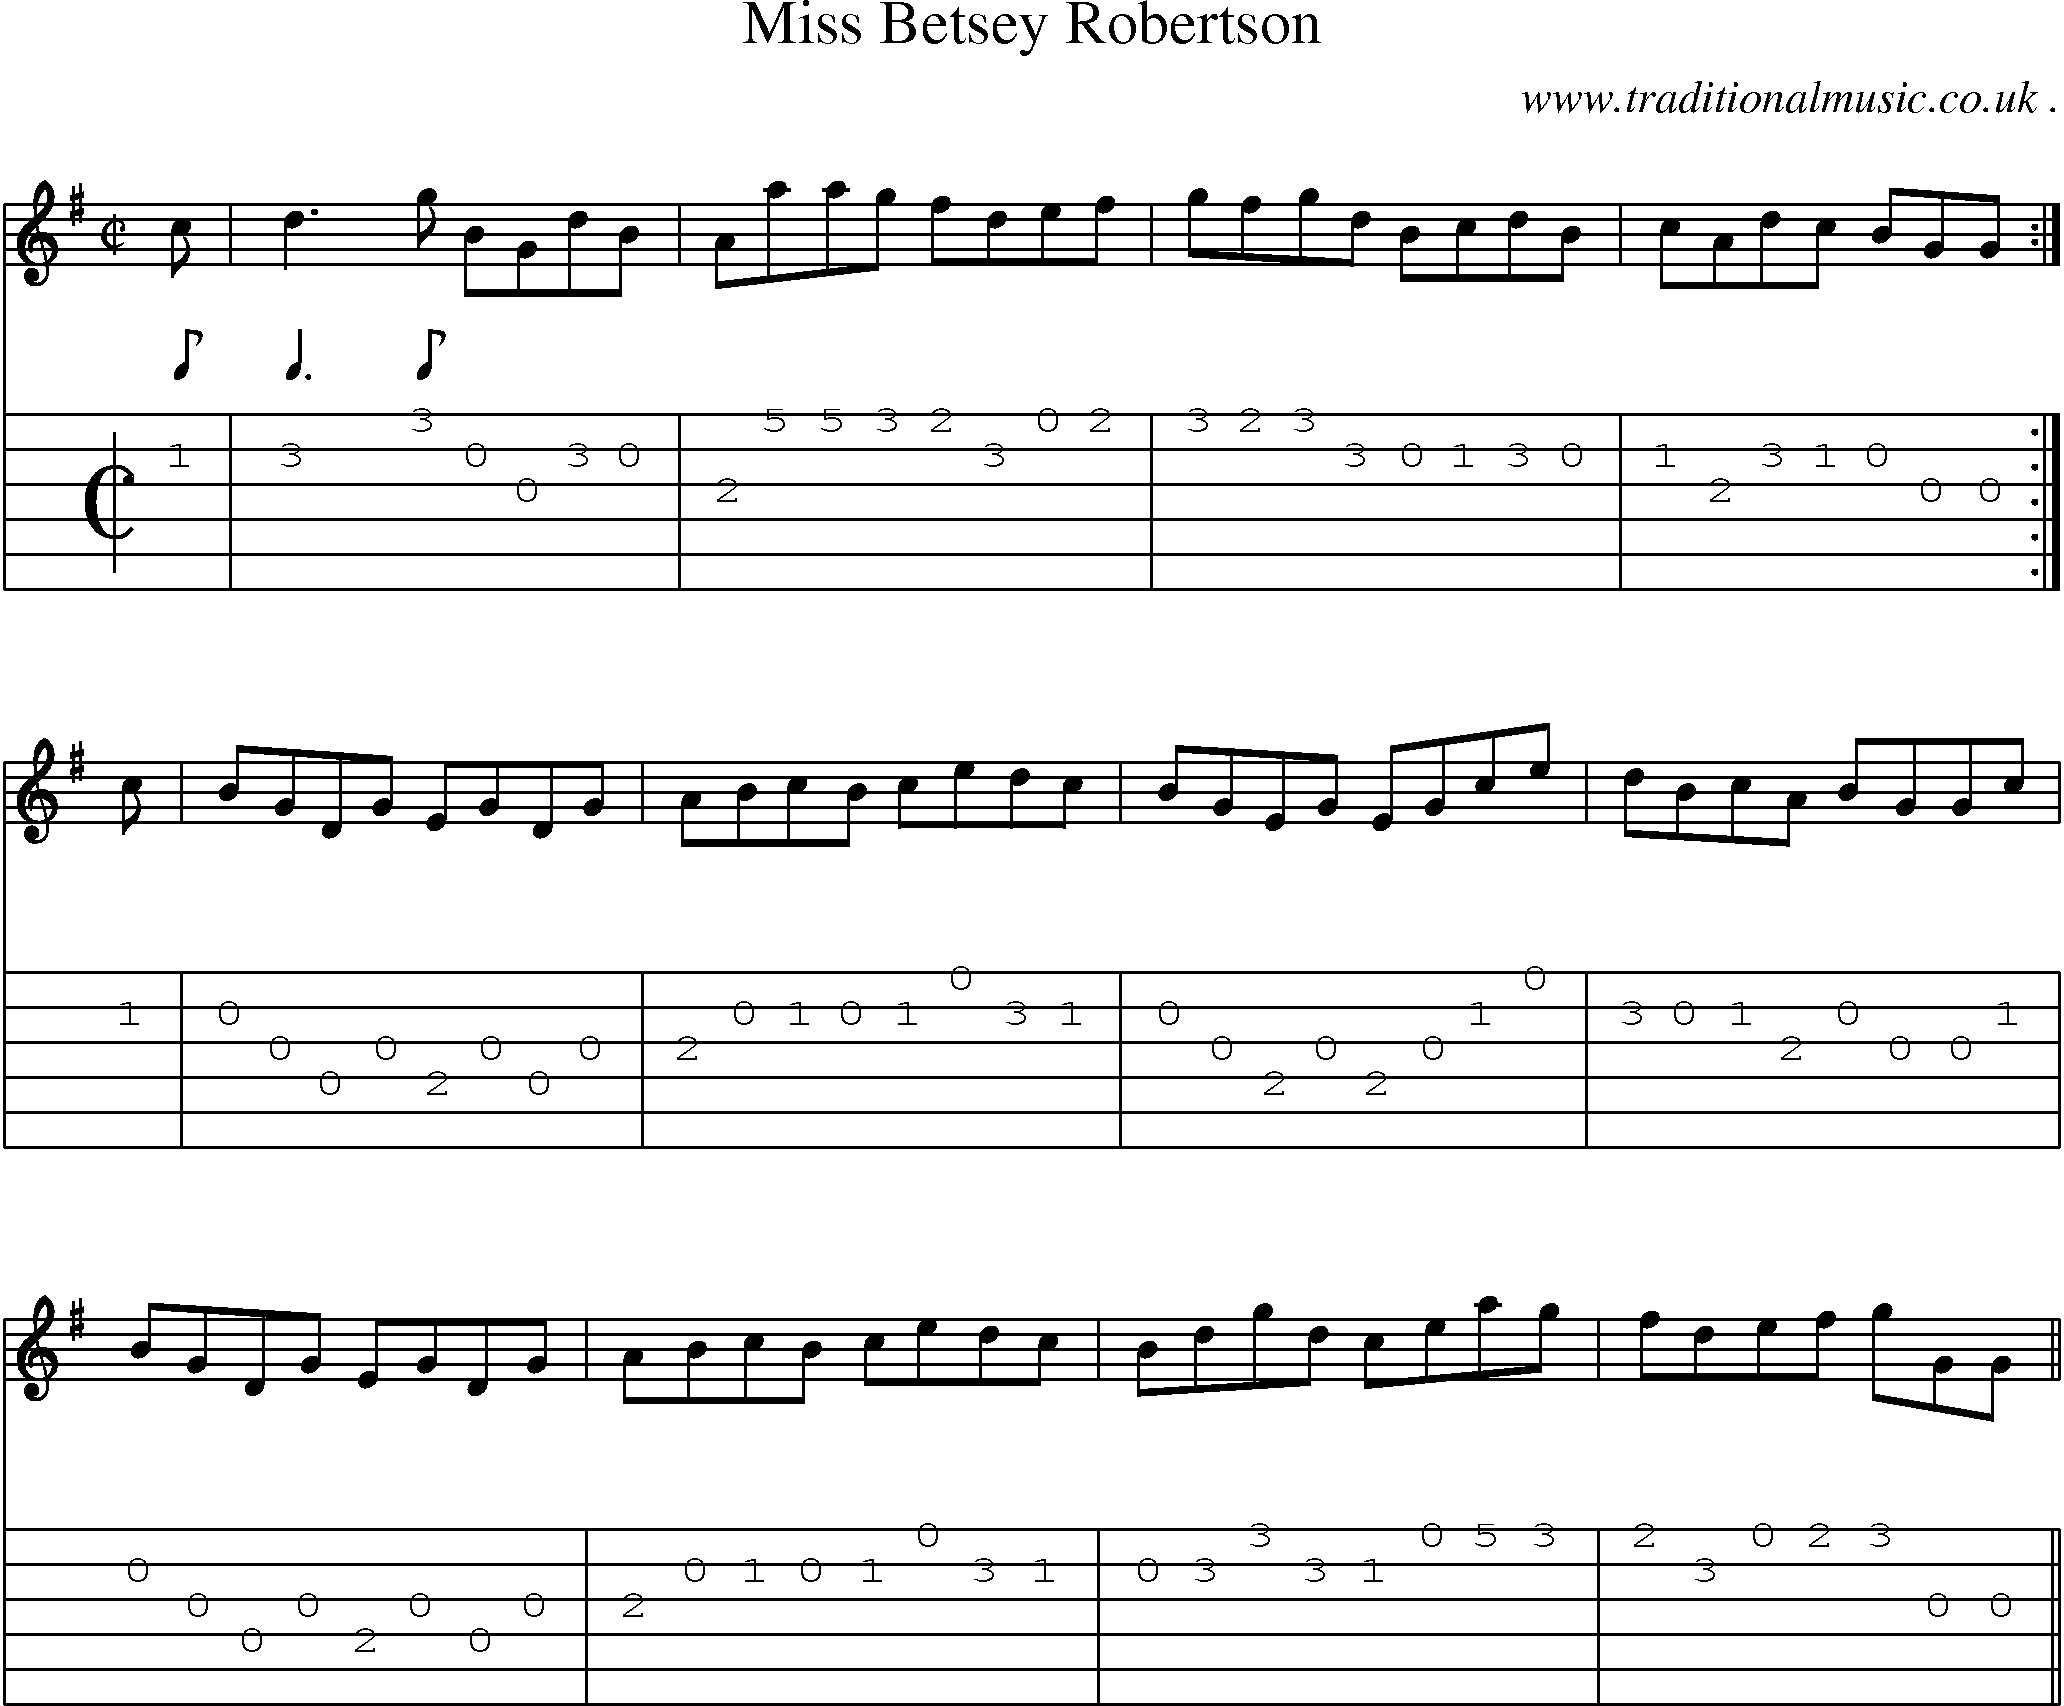 Sheet-music  score, Chords and Guitar Tabs for Miss Betsey Robertson